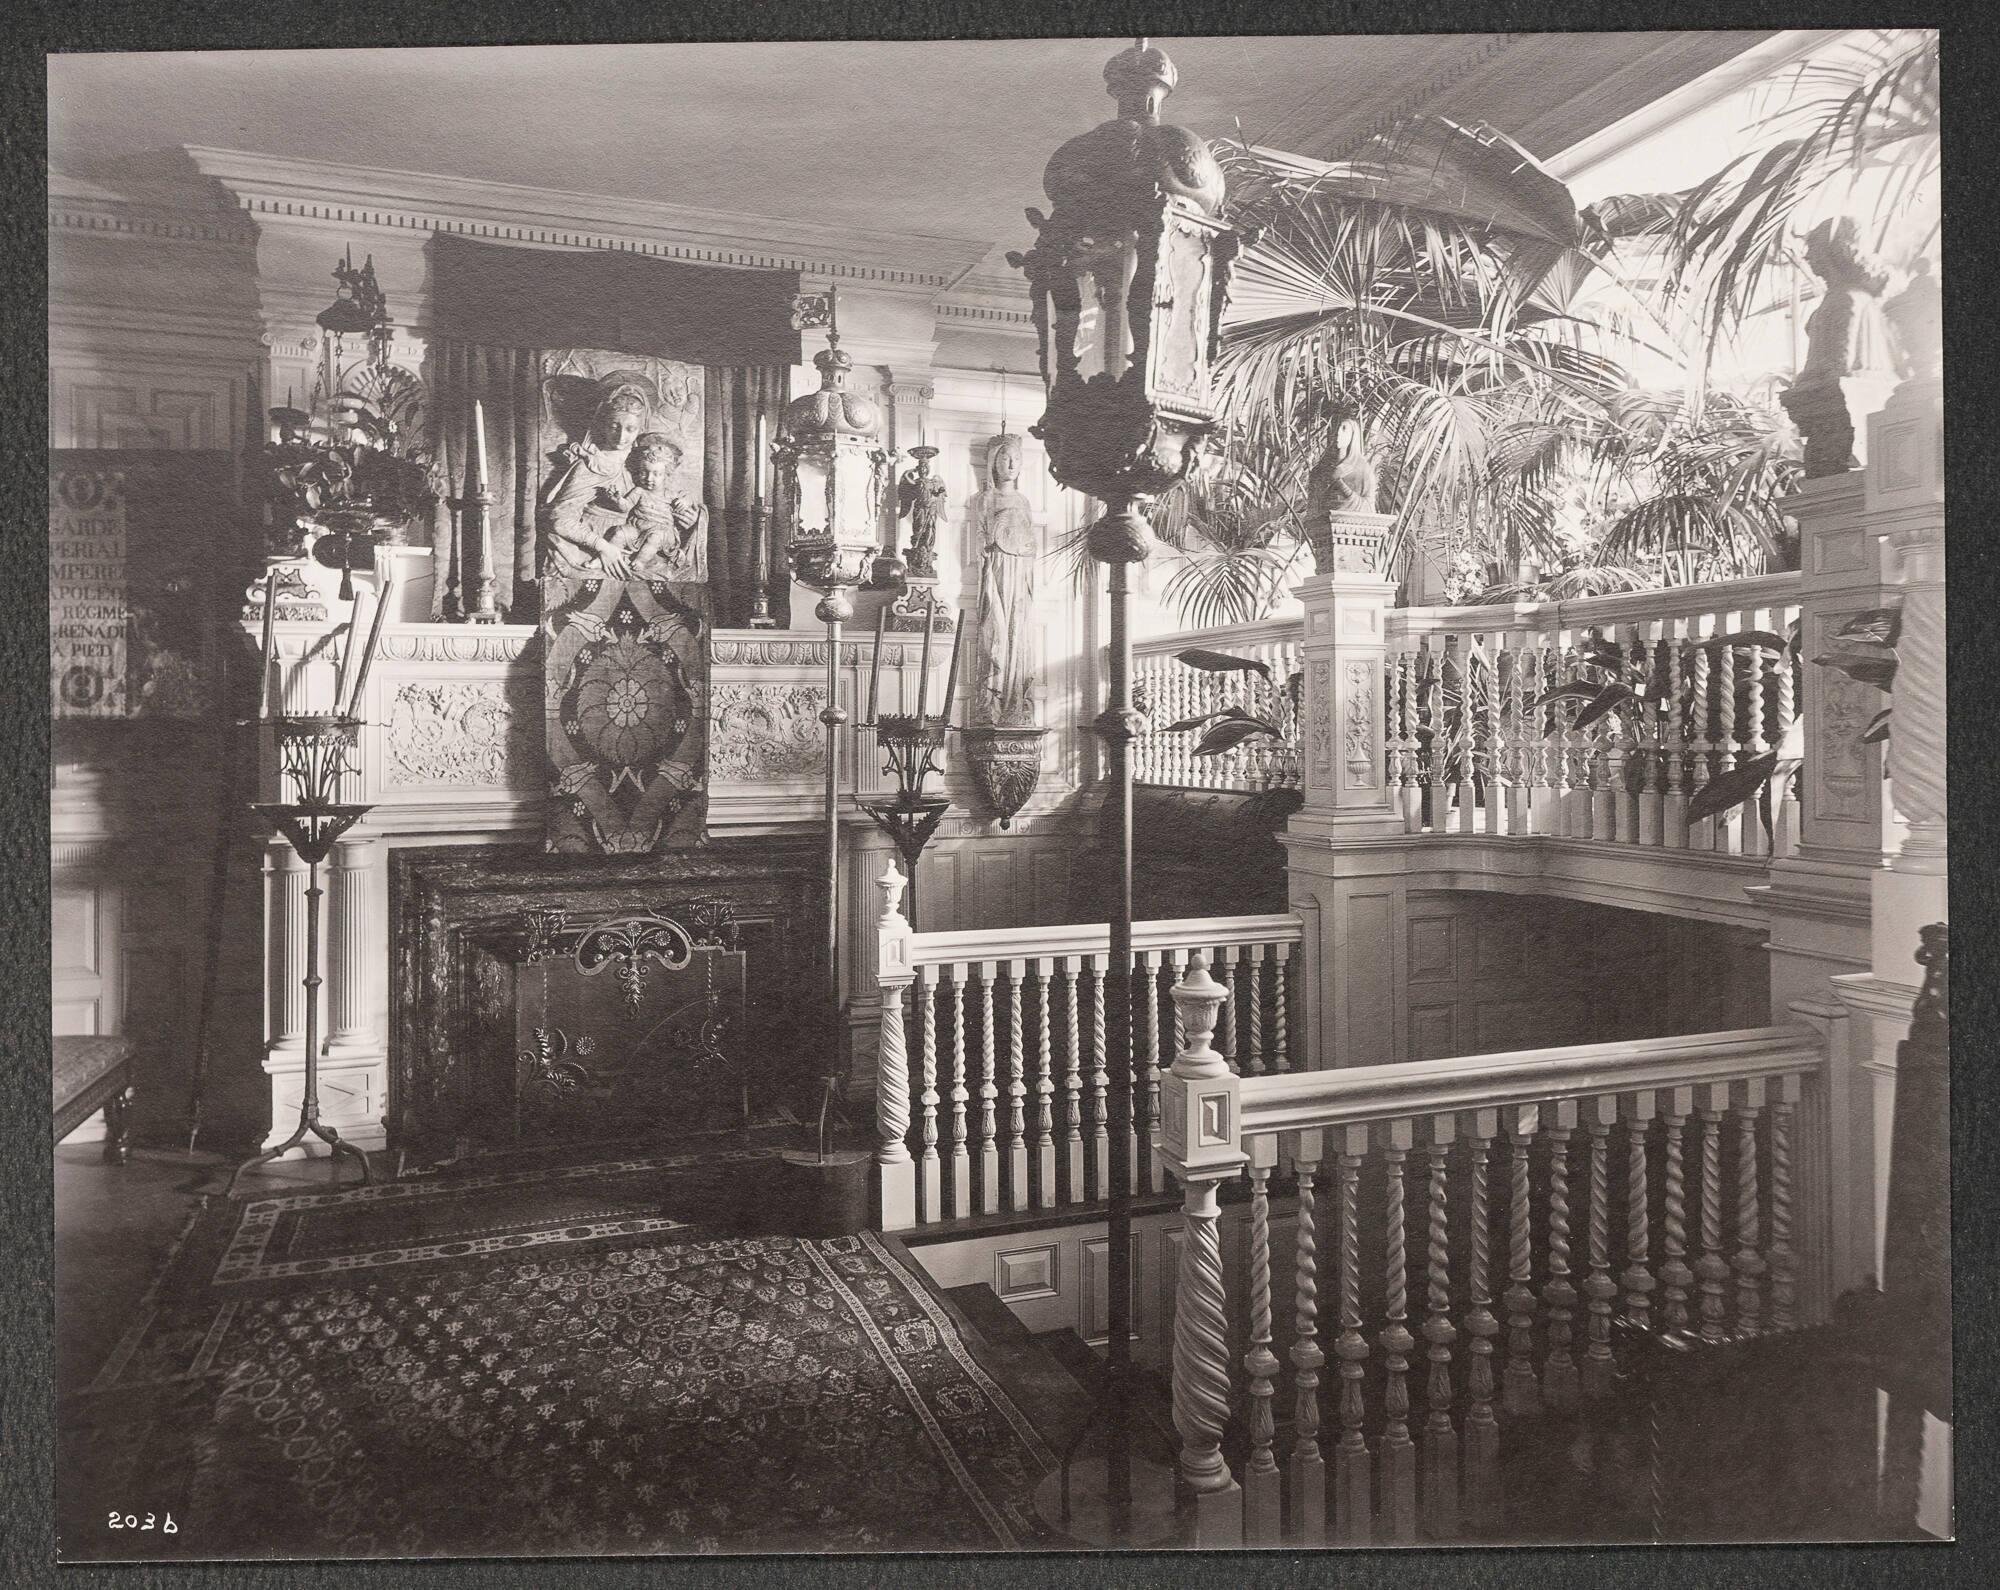 Opulent 19th century domestic interior of Isabella Stewart Gardner’s home, crowded with paintings, furniture, decorative arts. The entryway is dominated by a staircase and balcony bordered by elaborately carved banisters and spiral balustrades. Palm plants and plants reach over from the bay window balcony. 